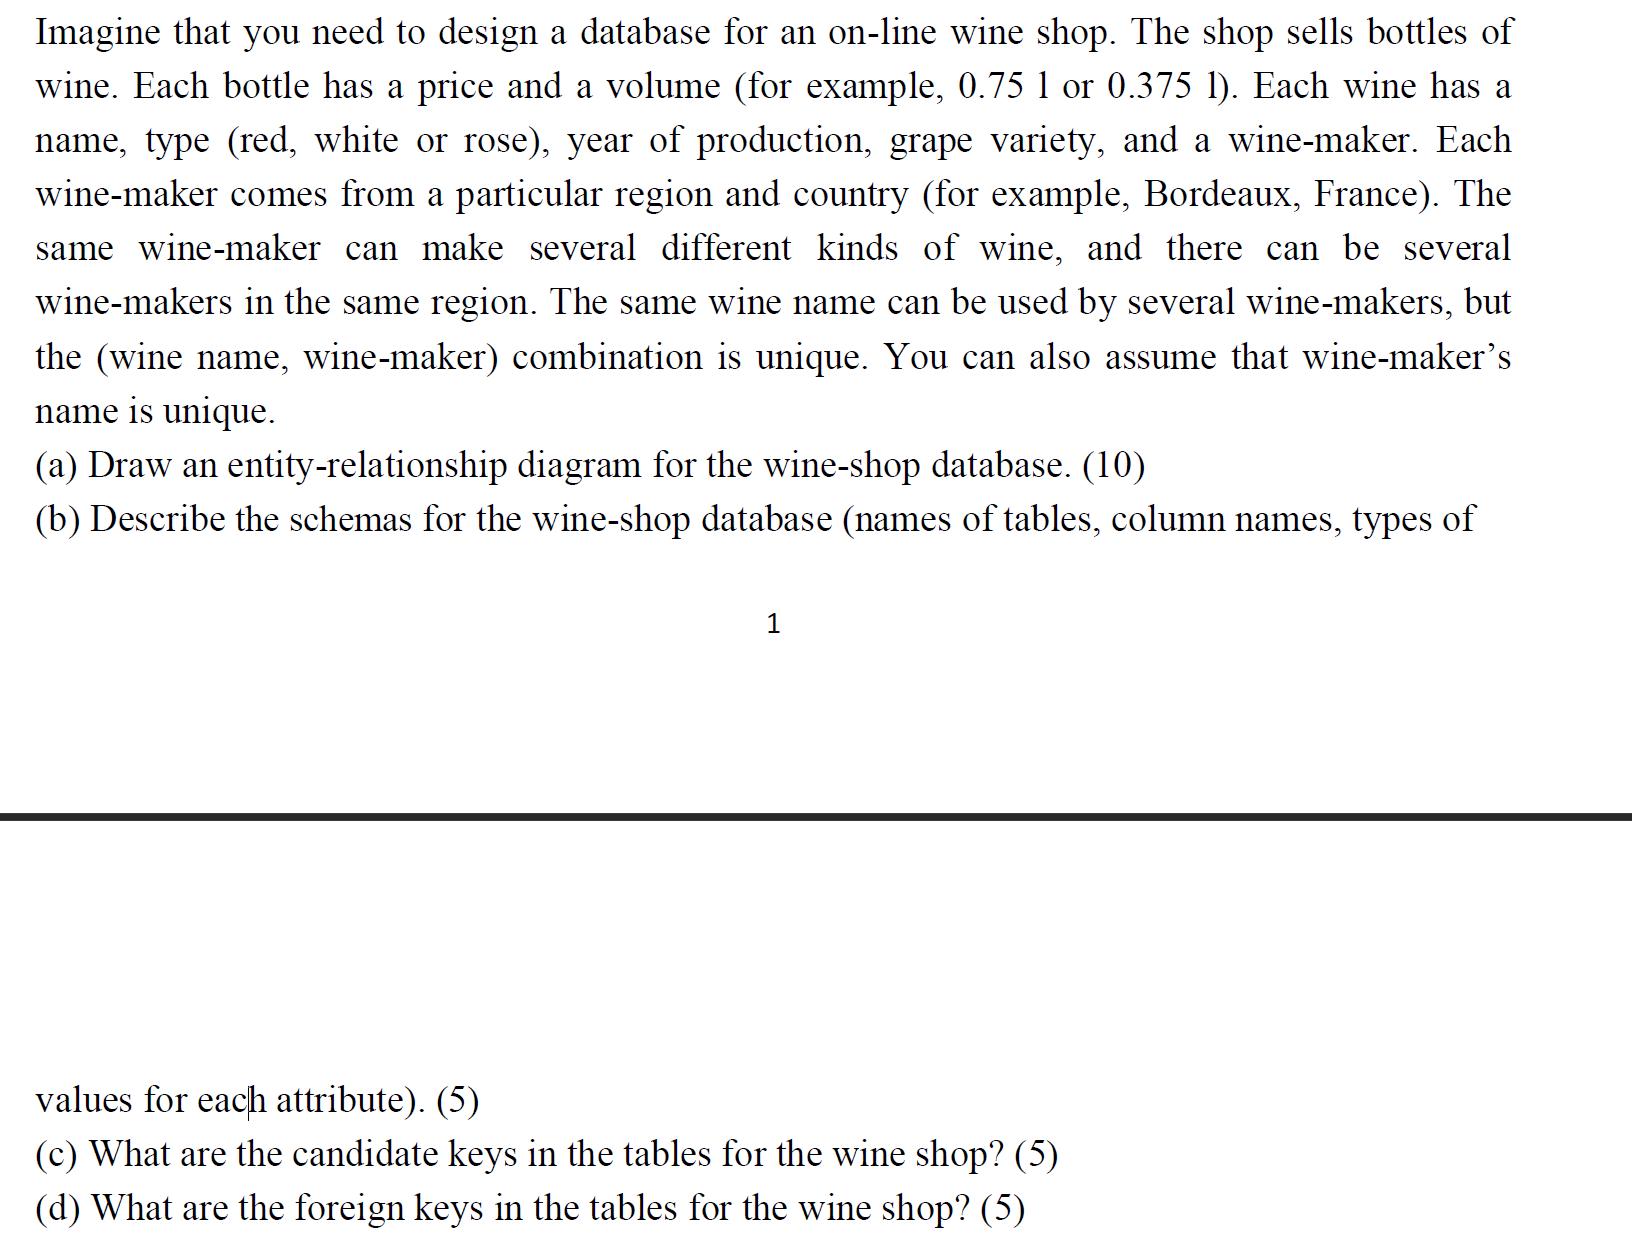 Imagine that you need to design a database for an on-line wine shop. The shop sells bottles of wine. Each